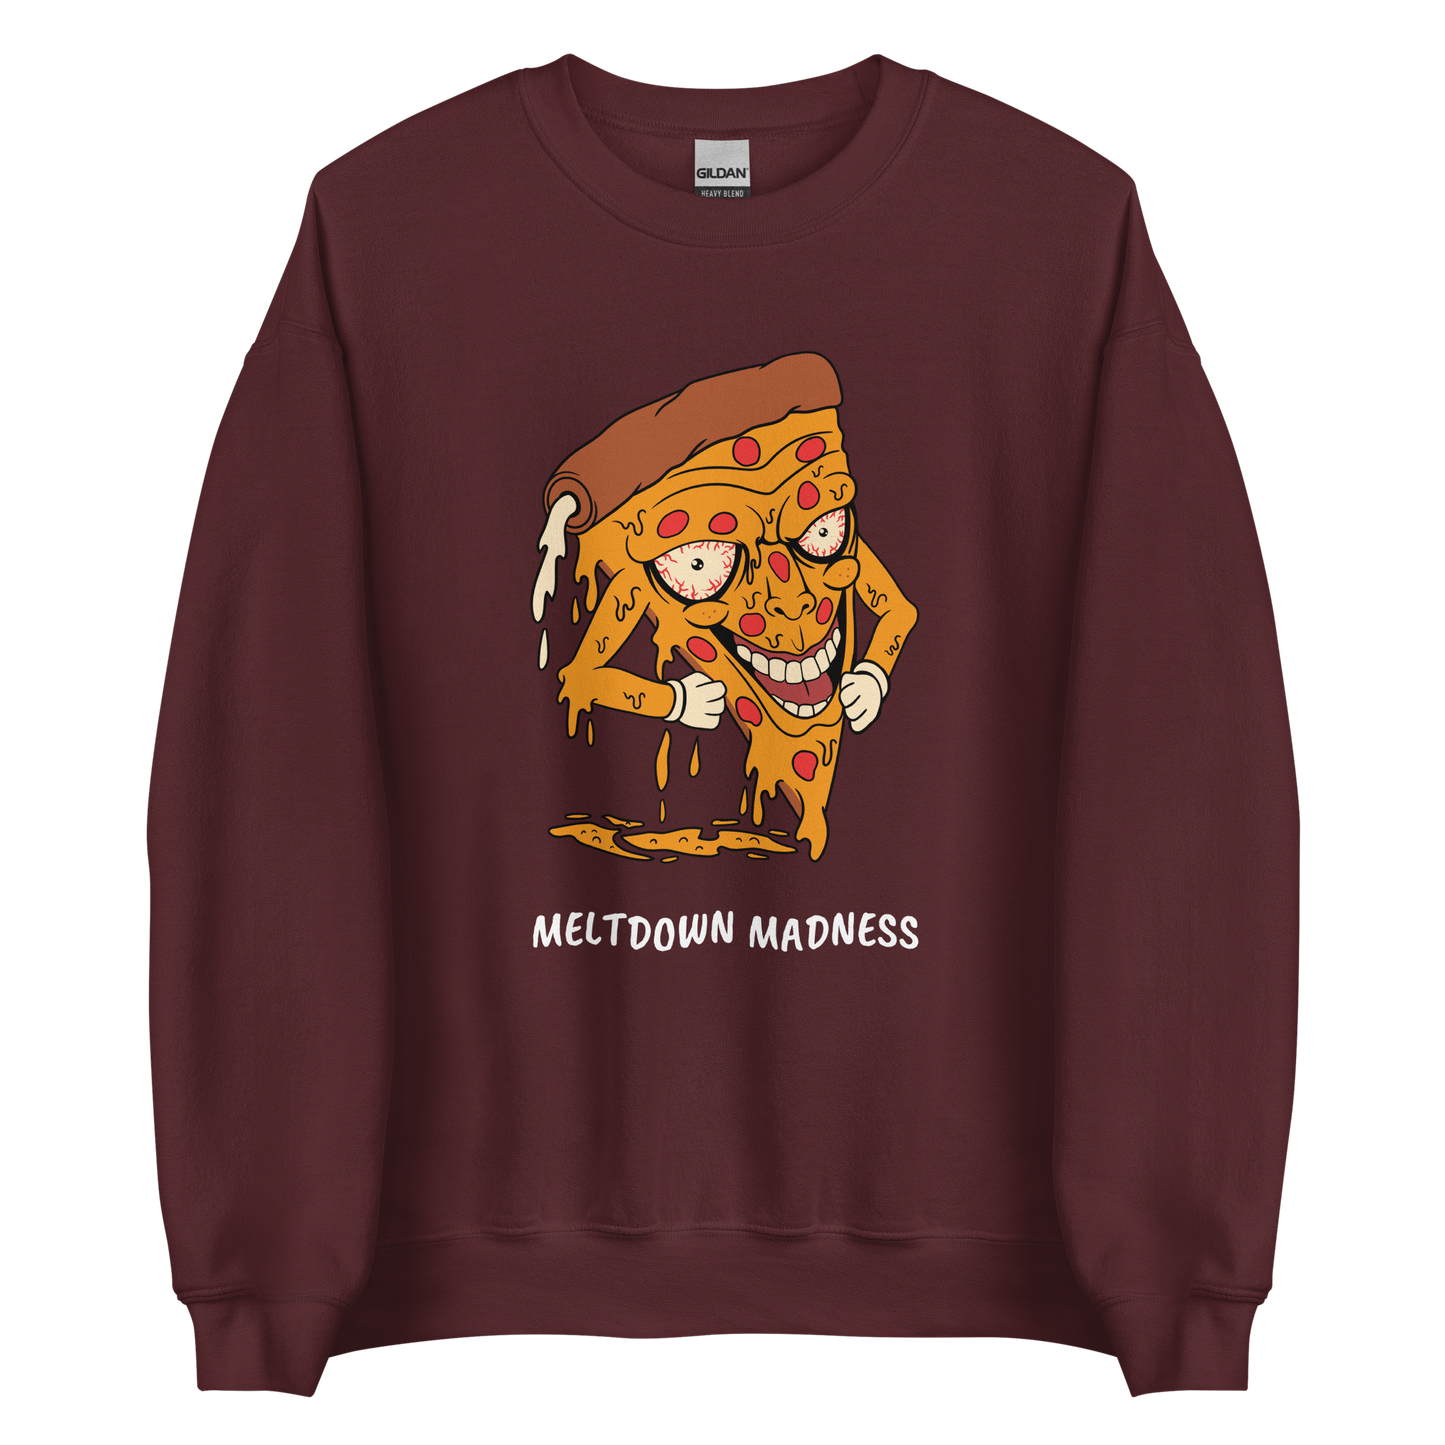 Maroon Melting Pizza Sweatshirt featuring a Meltdown Madness graphic on the chest - Funny Graphic Pizza Sweatshirts - Boozy Fox